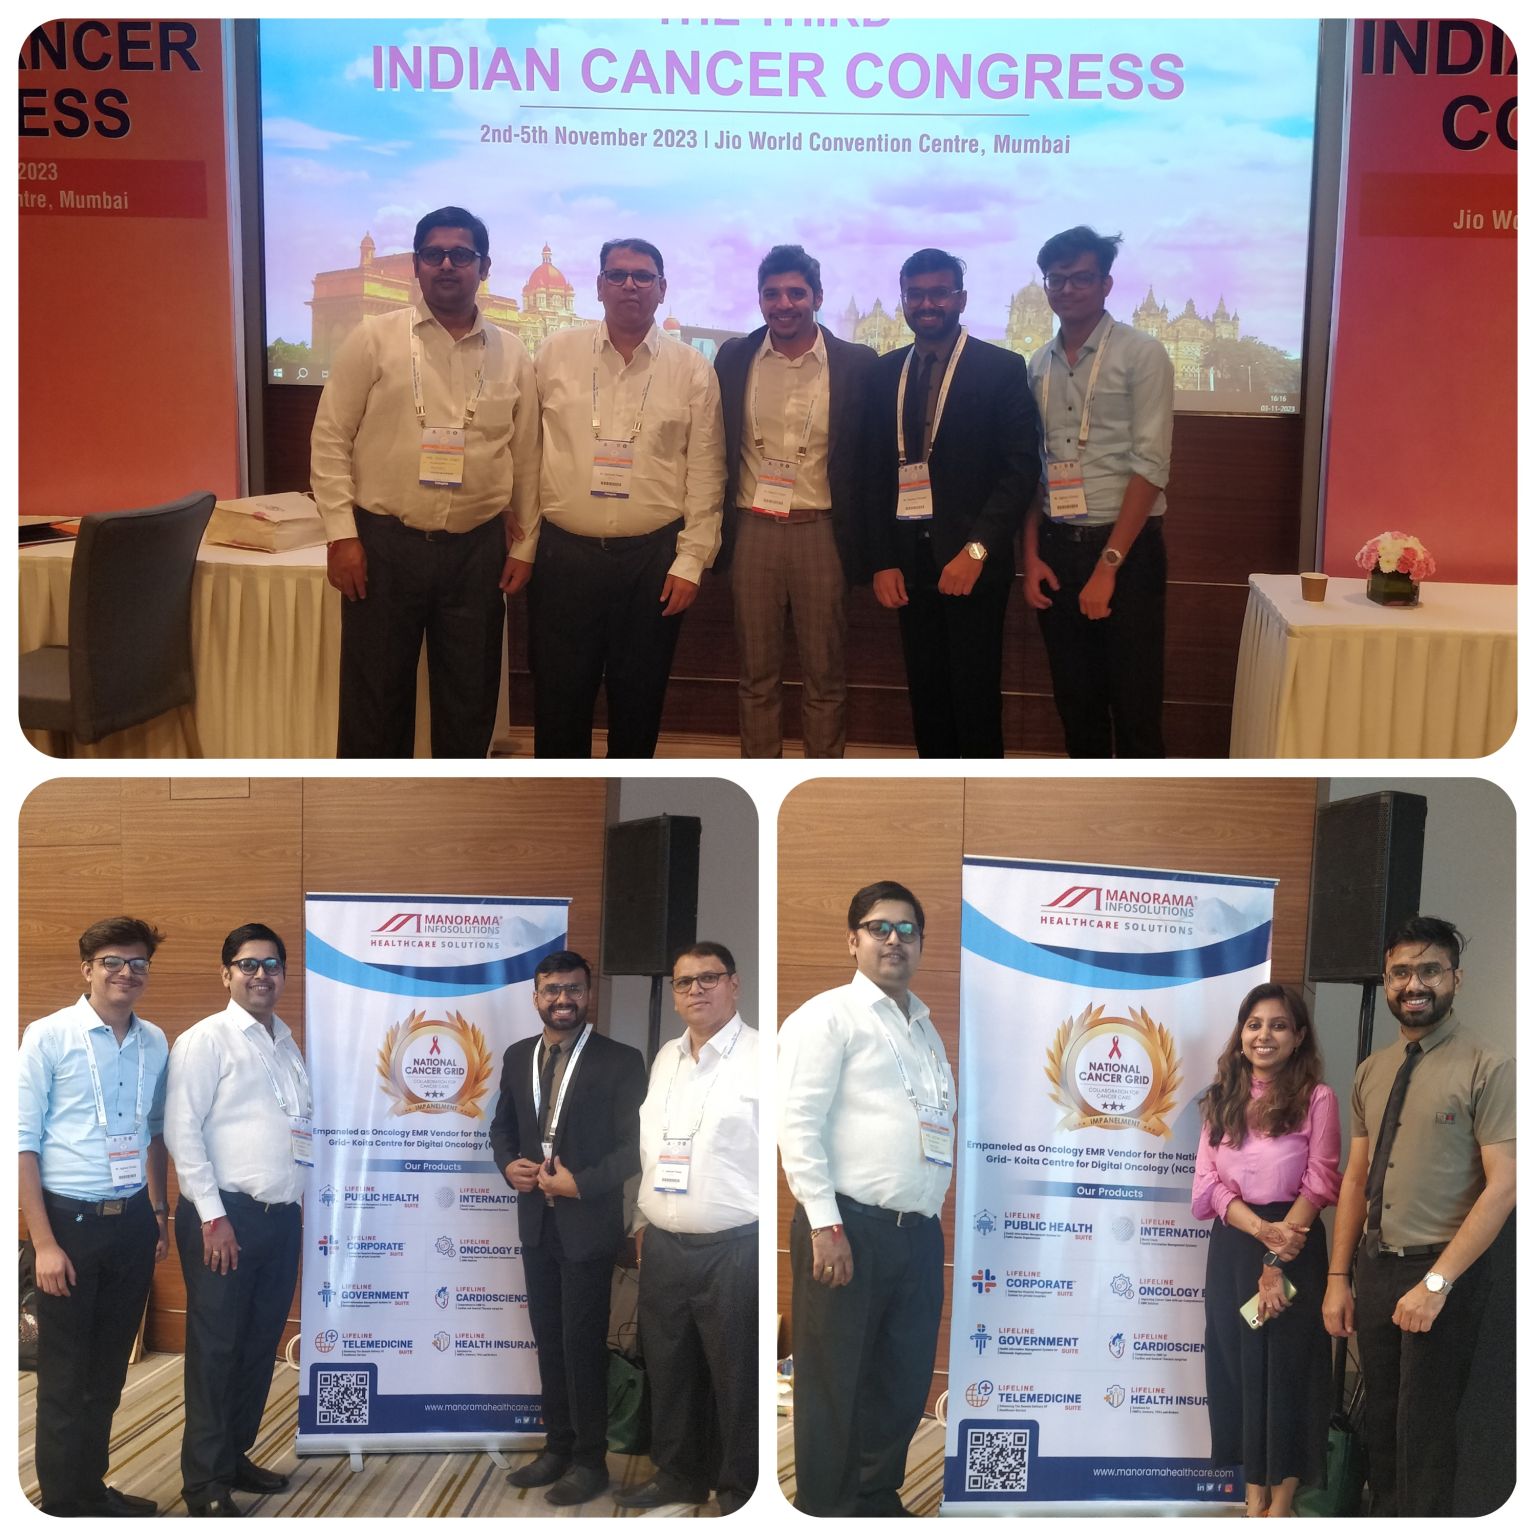 The 3rd Indian Cancer Congress hosted at Jio World Convention Centre in Mumbai from 2nd- 5th November, 2023